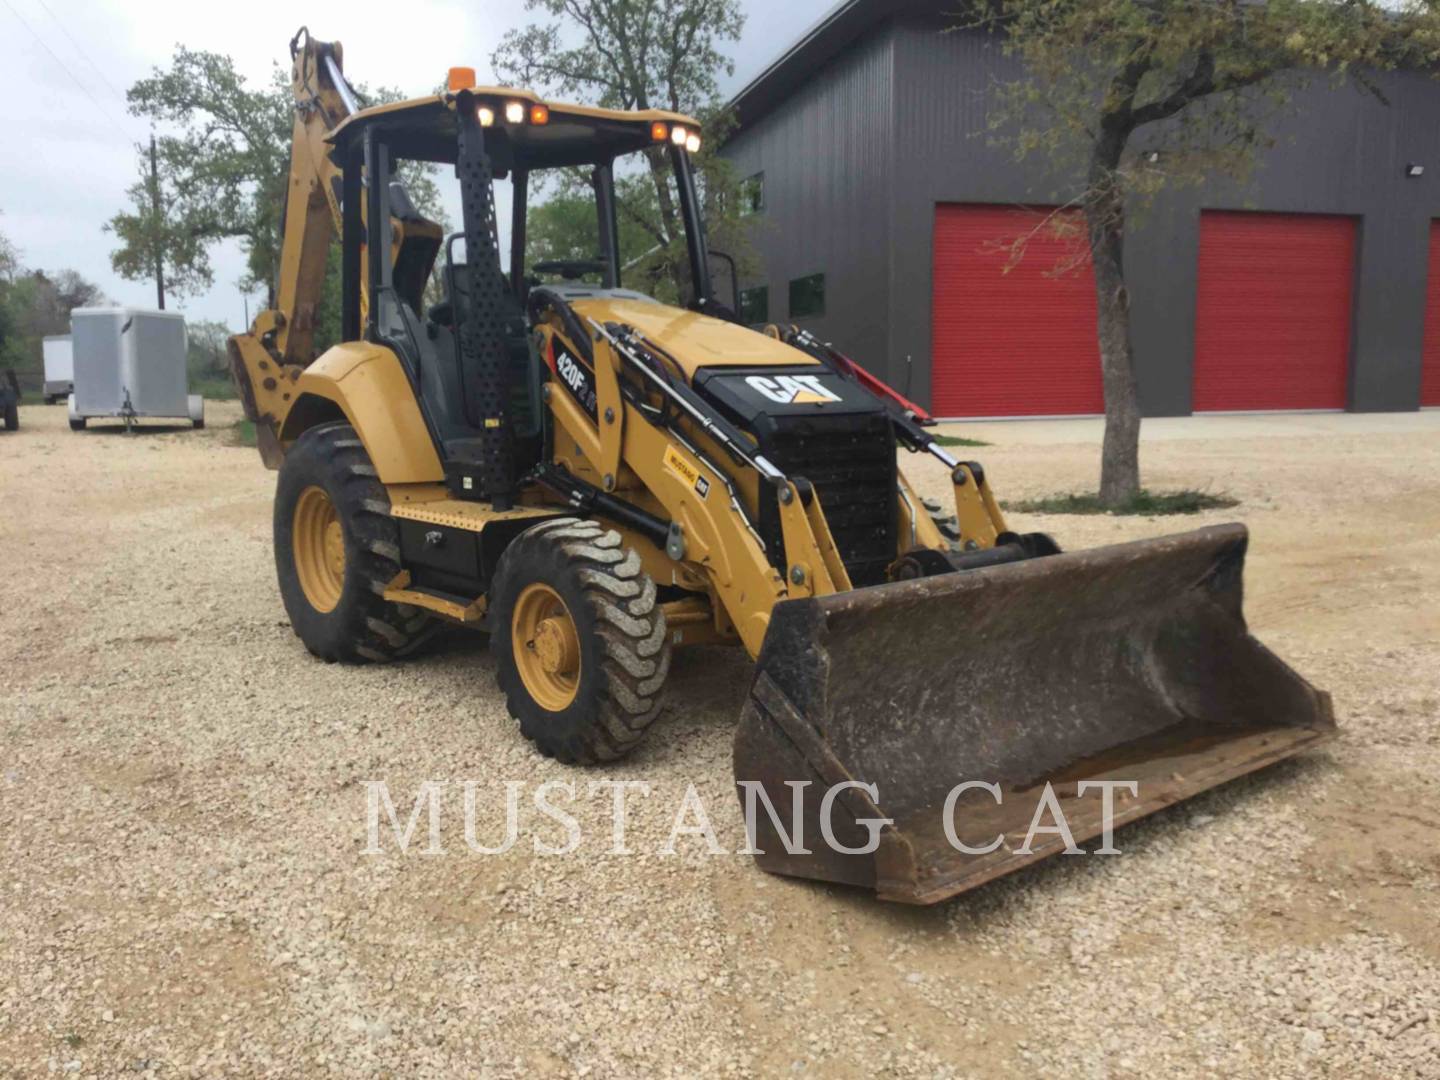 2017 Caterpillar 420F2IT4SO Tractor Loader Backhoe for sale in HOUSTON, TX  | IronSearch